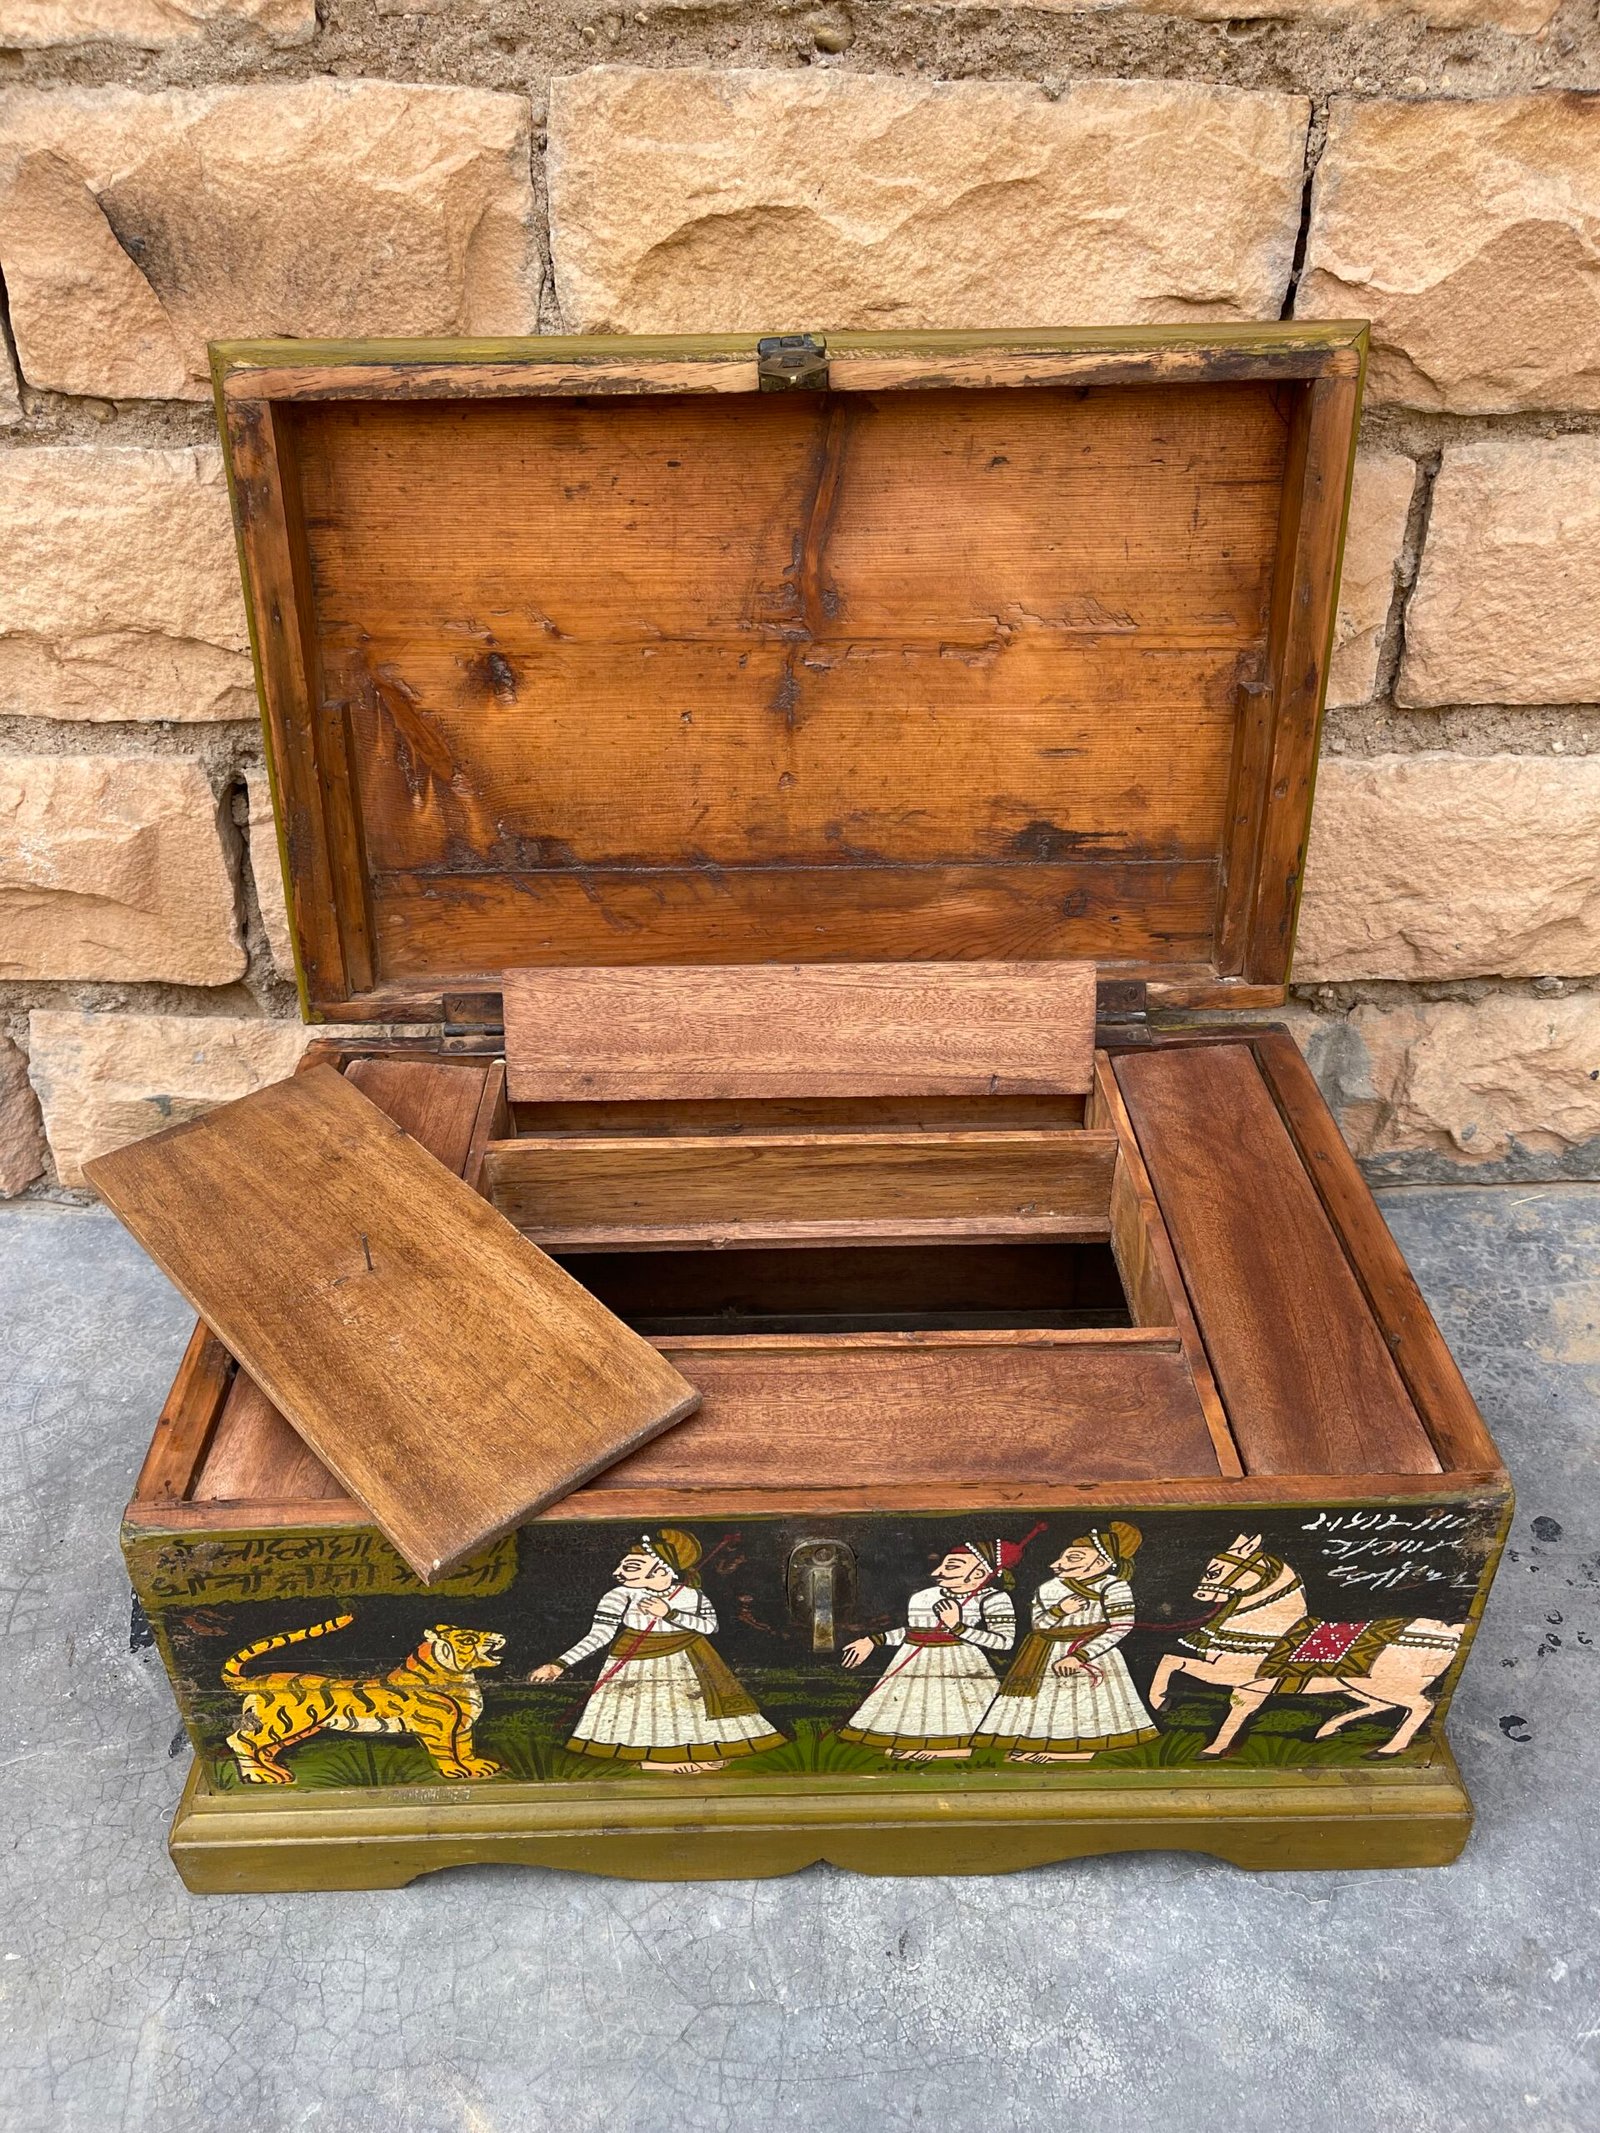 Antique Dresser or Jewelry Box with Enamel Portrait and Gilt Bronze Mounts  For Sale at 1stDibs | antique dresser box, antique enamel boxes, antique  enamel jewelry